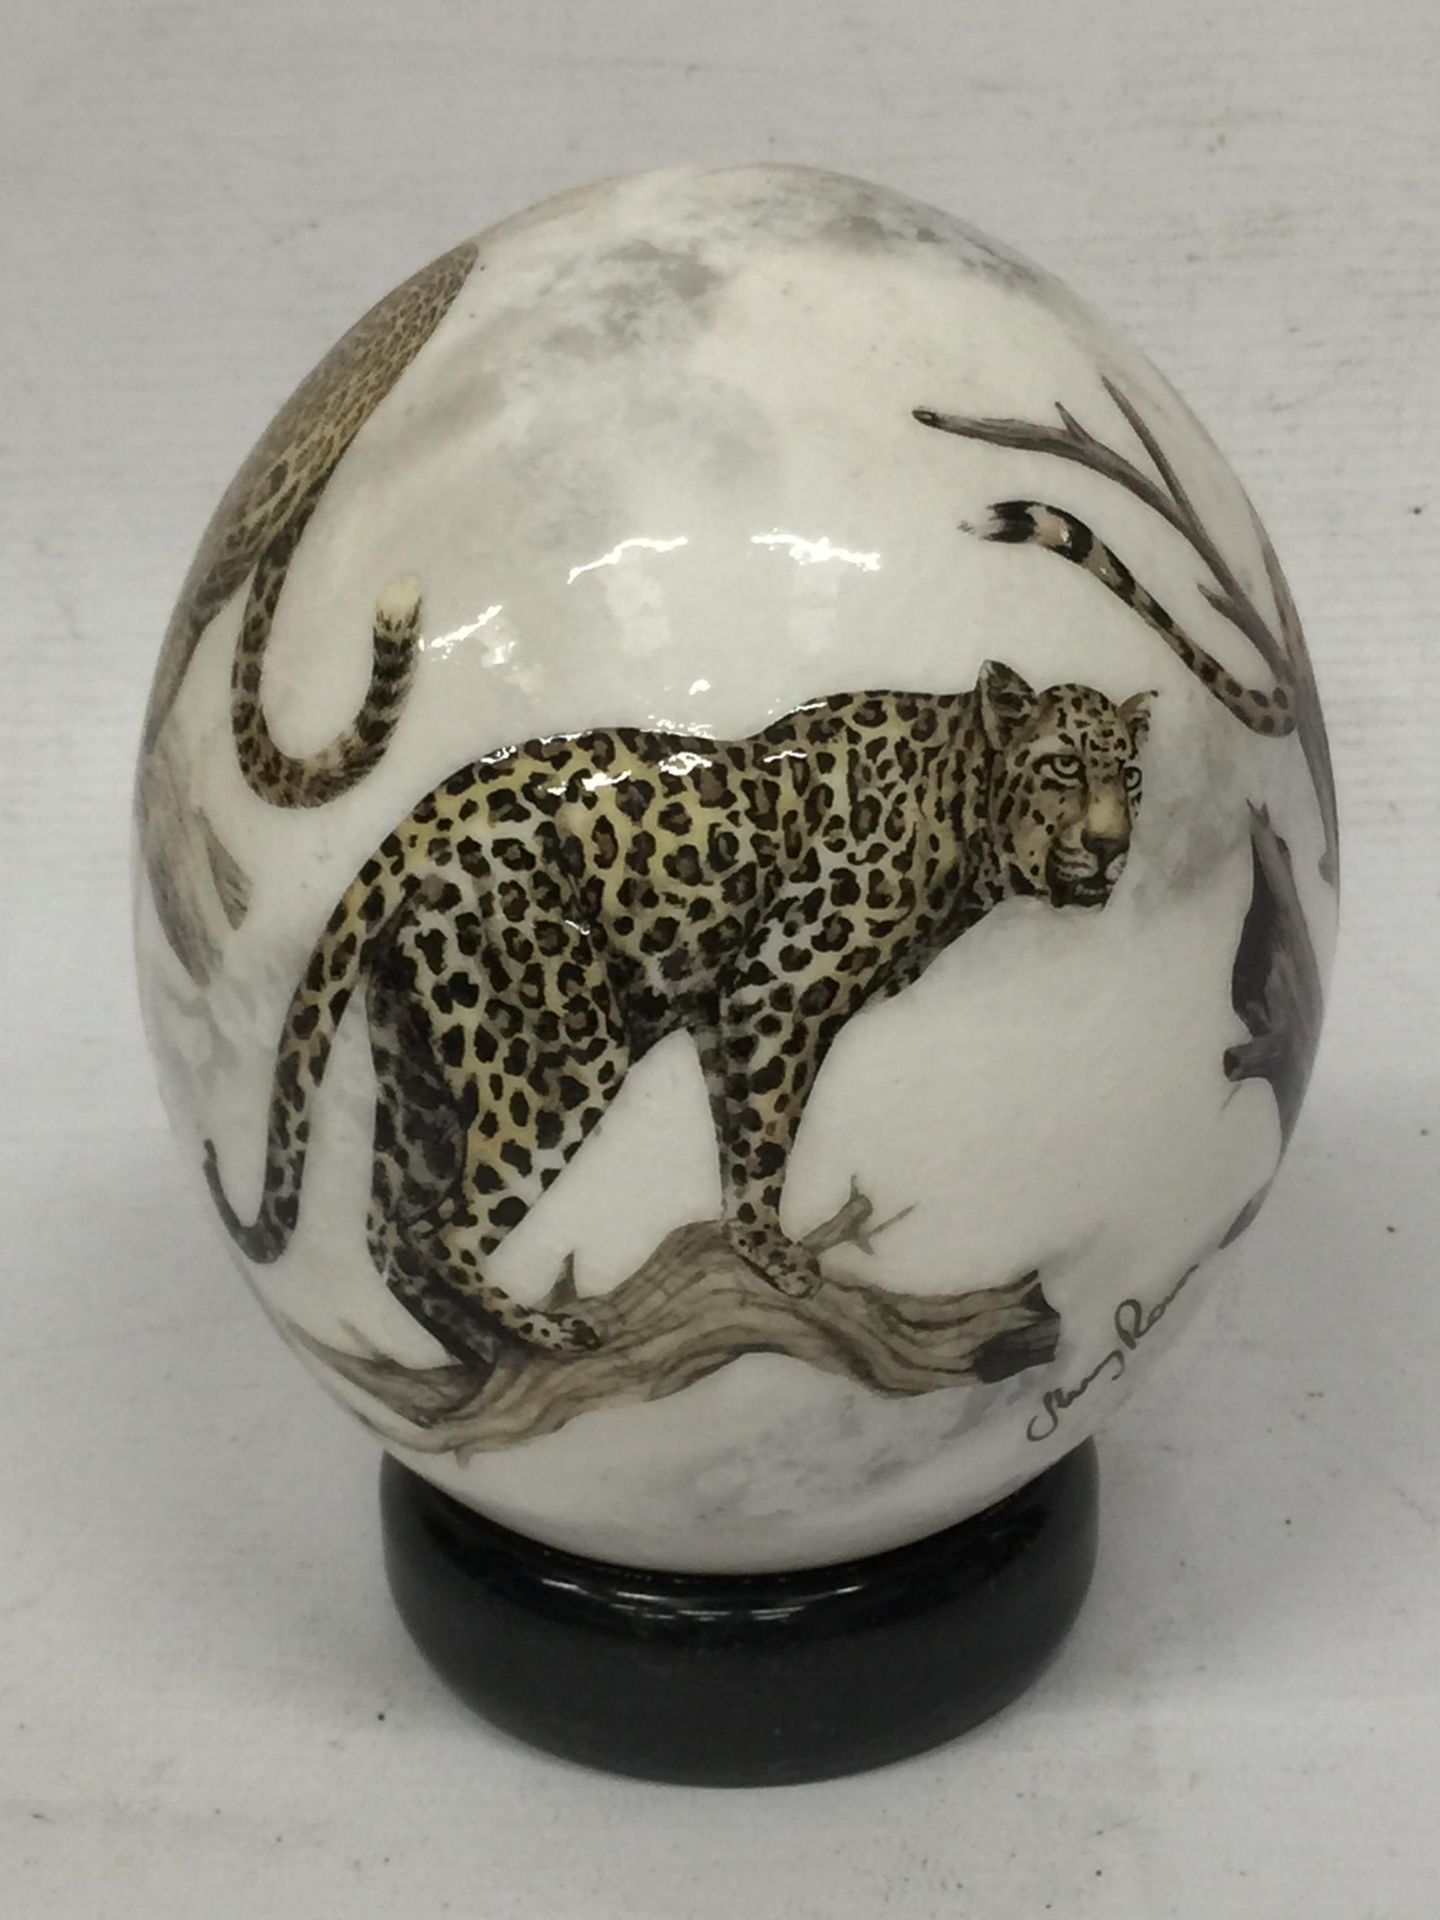 A HAND PAINTED OSTRICH EGG ON STAND WITH CHEETAH DESIGN, INDISTINCTLY SIGNED - Image 2 of 5